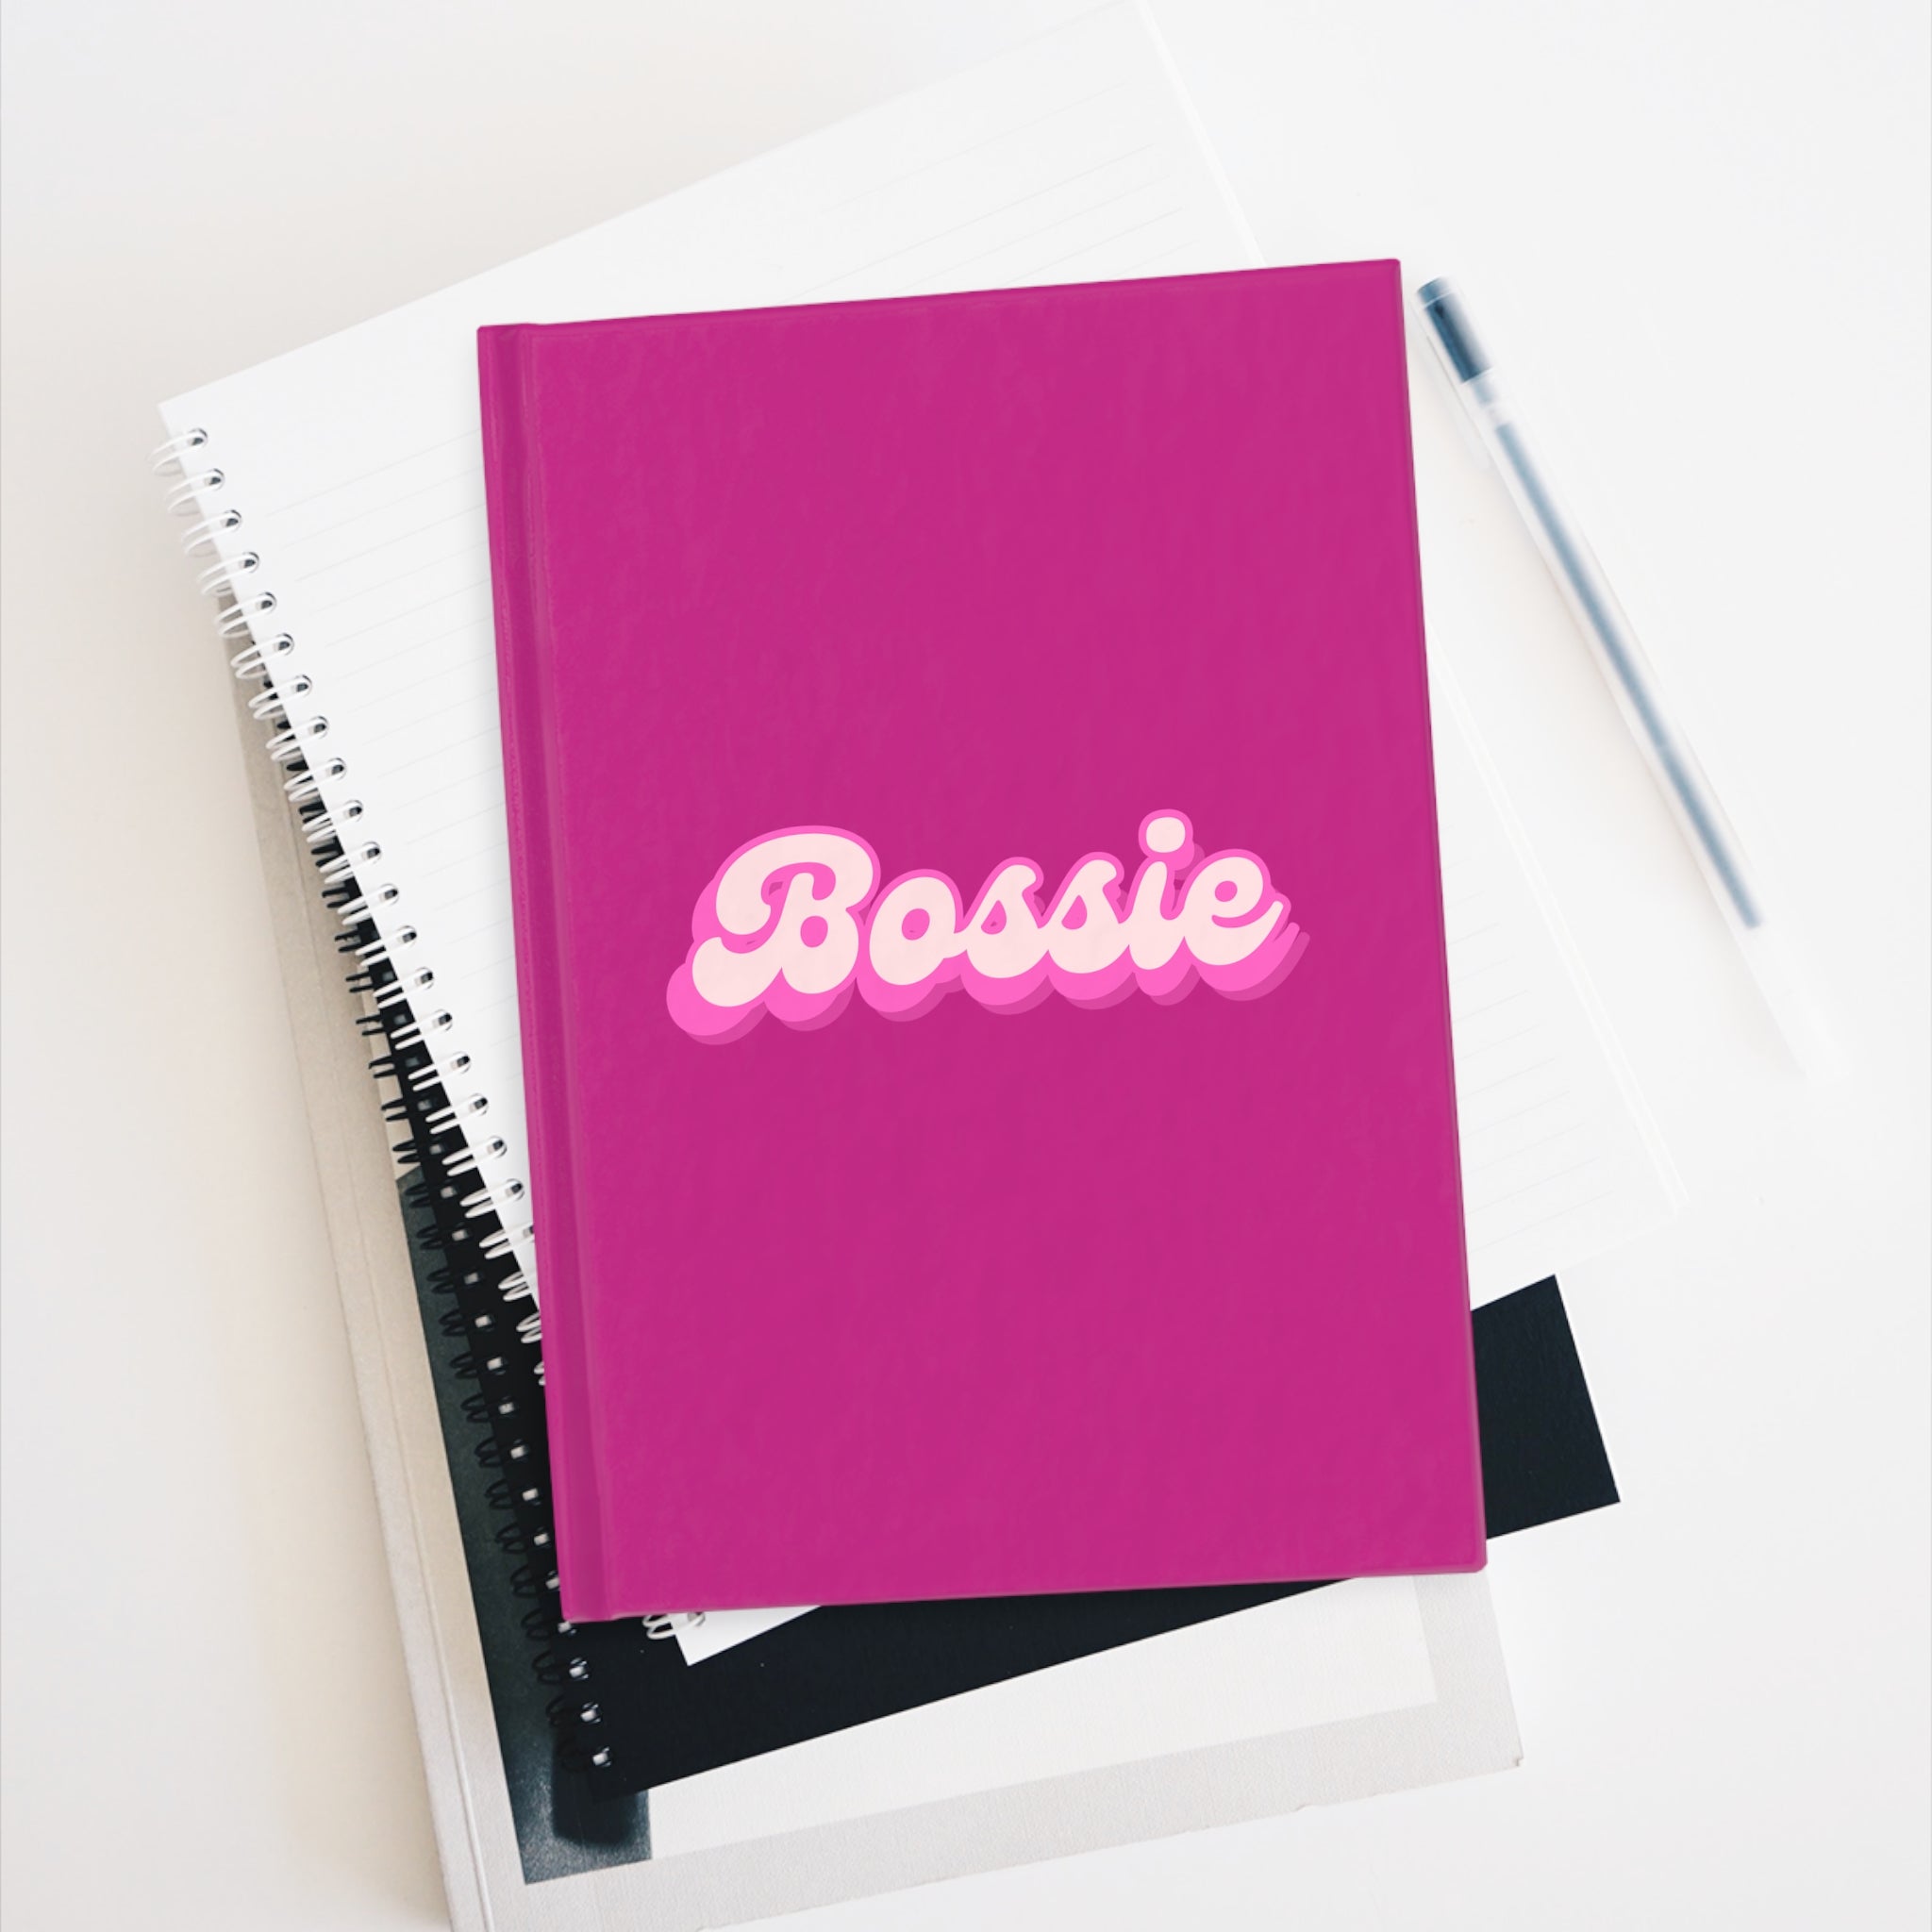 Bright Pink "Bossie" Journal - Ruled Line, Lined Notebook, Gratitude Journal